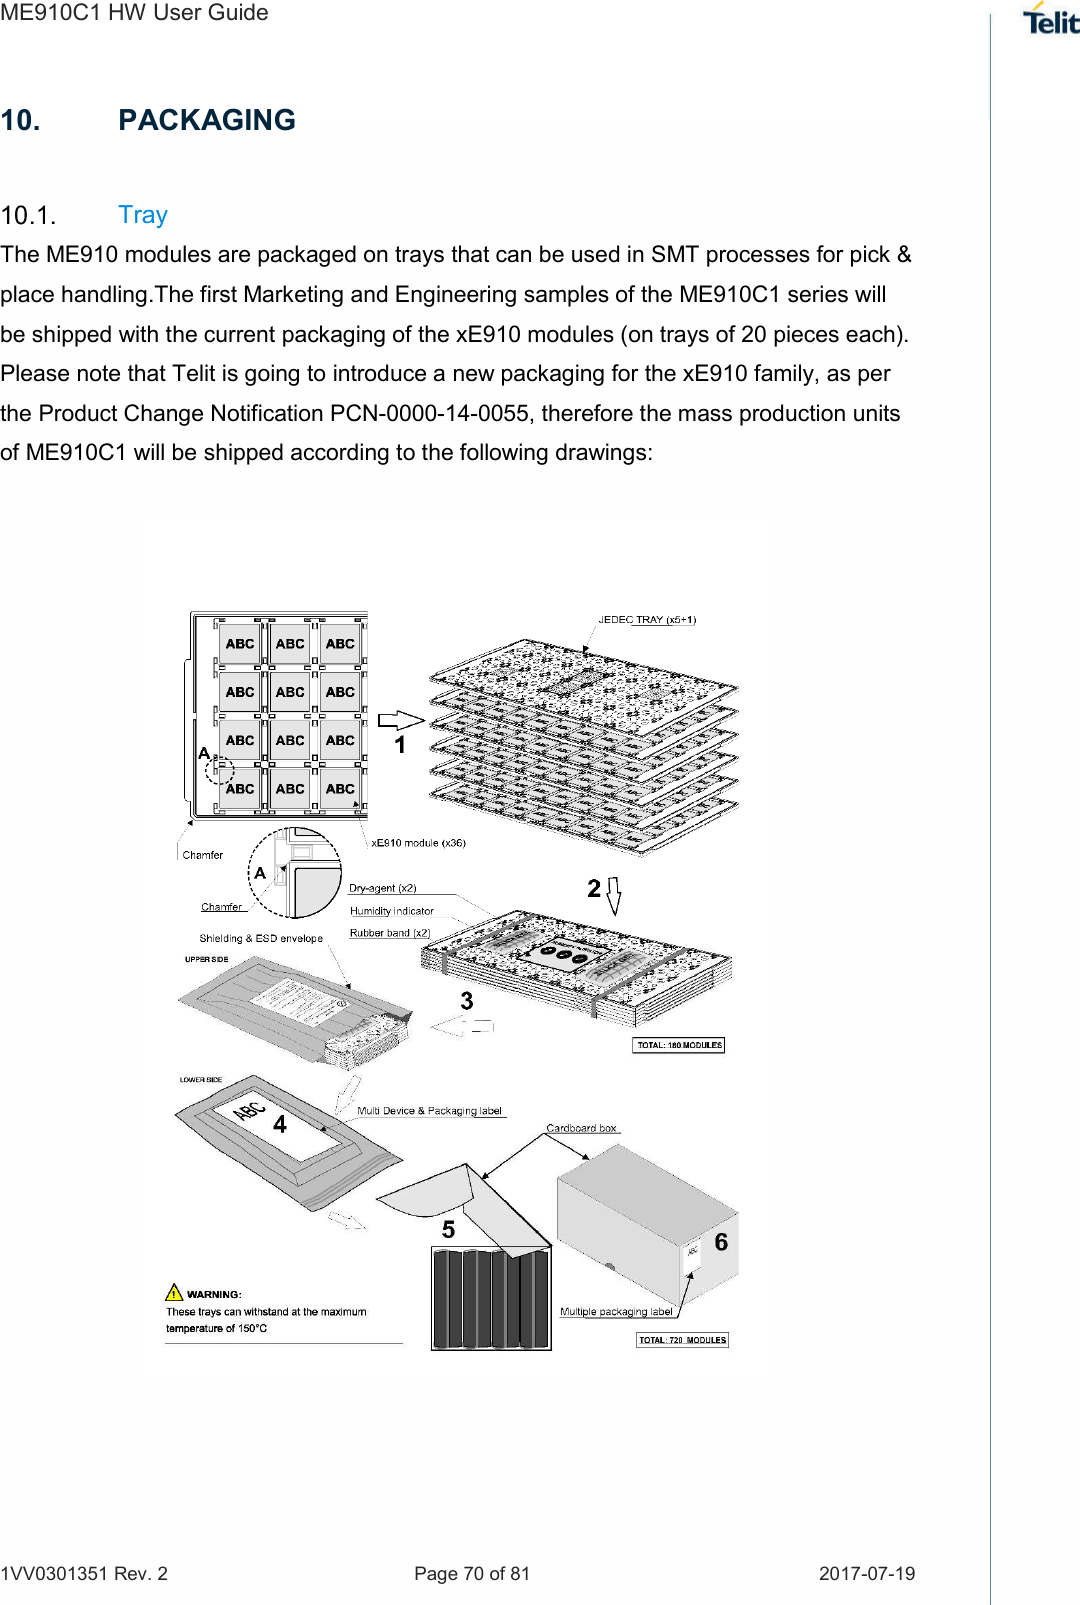 ME910C1 HW User Guide 1VV0301351 Rev. 2  Page 70 of 81  2017-07-19  10.  PACKAGING   Tray The ME910 modules are packaged on trays that can be used in SMT processes for pick &amp; place handling.The first Marketing and Engineering samples of the ME910C1 series will be shipped with the current packaging of the xE910 modules (on trays of 20 pieces each). Please note that Telit is going to introduce a new packaging for the xE910 family, as per the Product Change Notification PCN-0000-14-0055, therefore the mass production units of ME910C1 will be shipped according to the following drawings:      